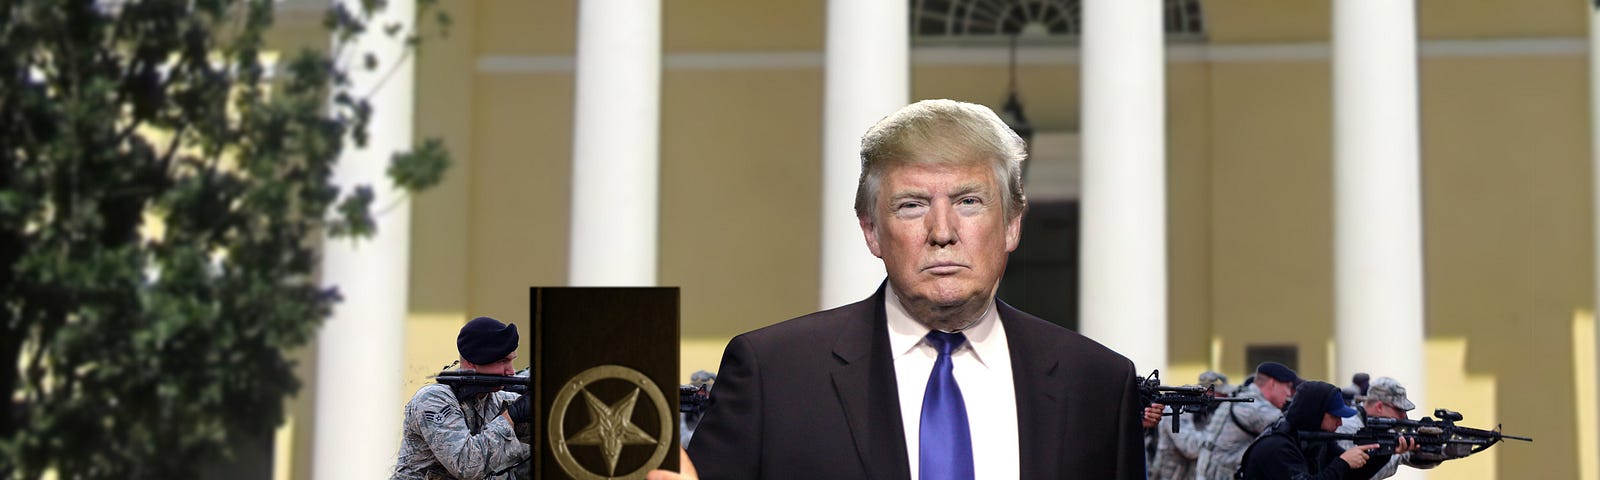 Trump holding a Satanic Bible while troops attack